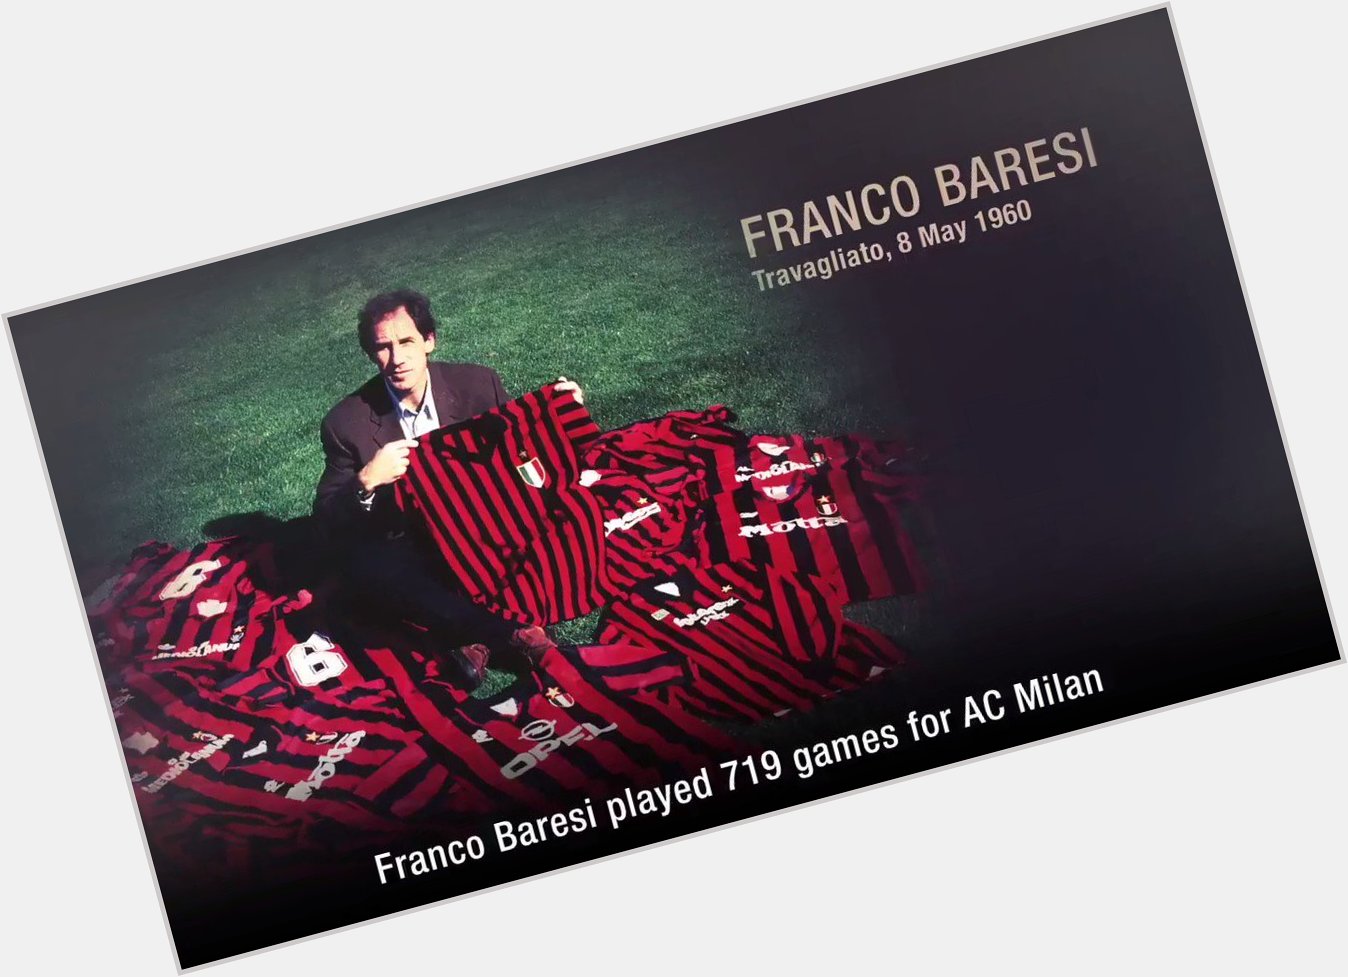 Happy 57th birthday to Franco Baresi!

What. A. Player!

